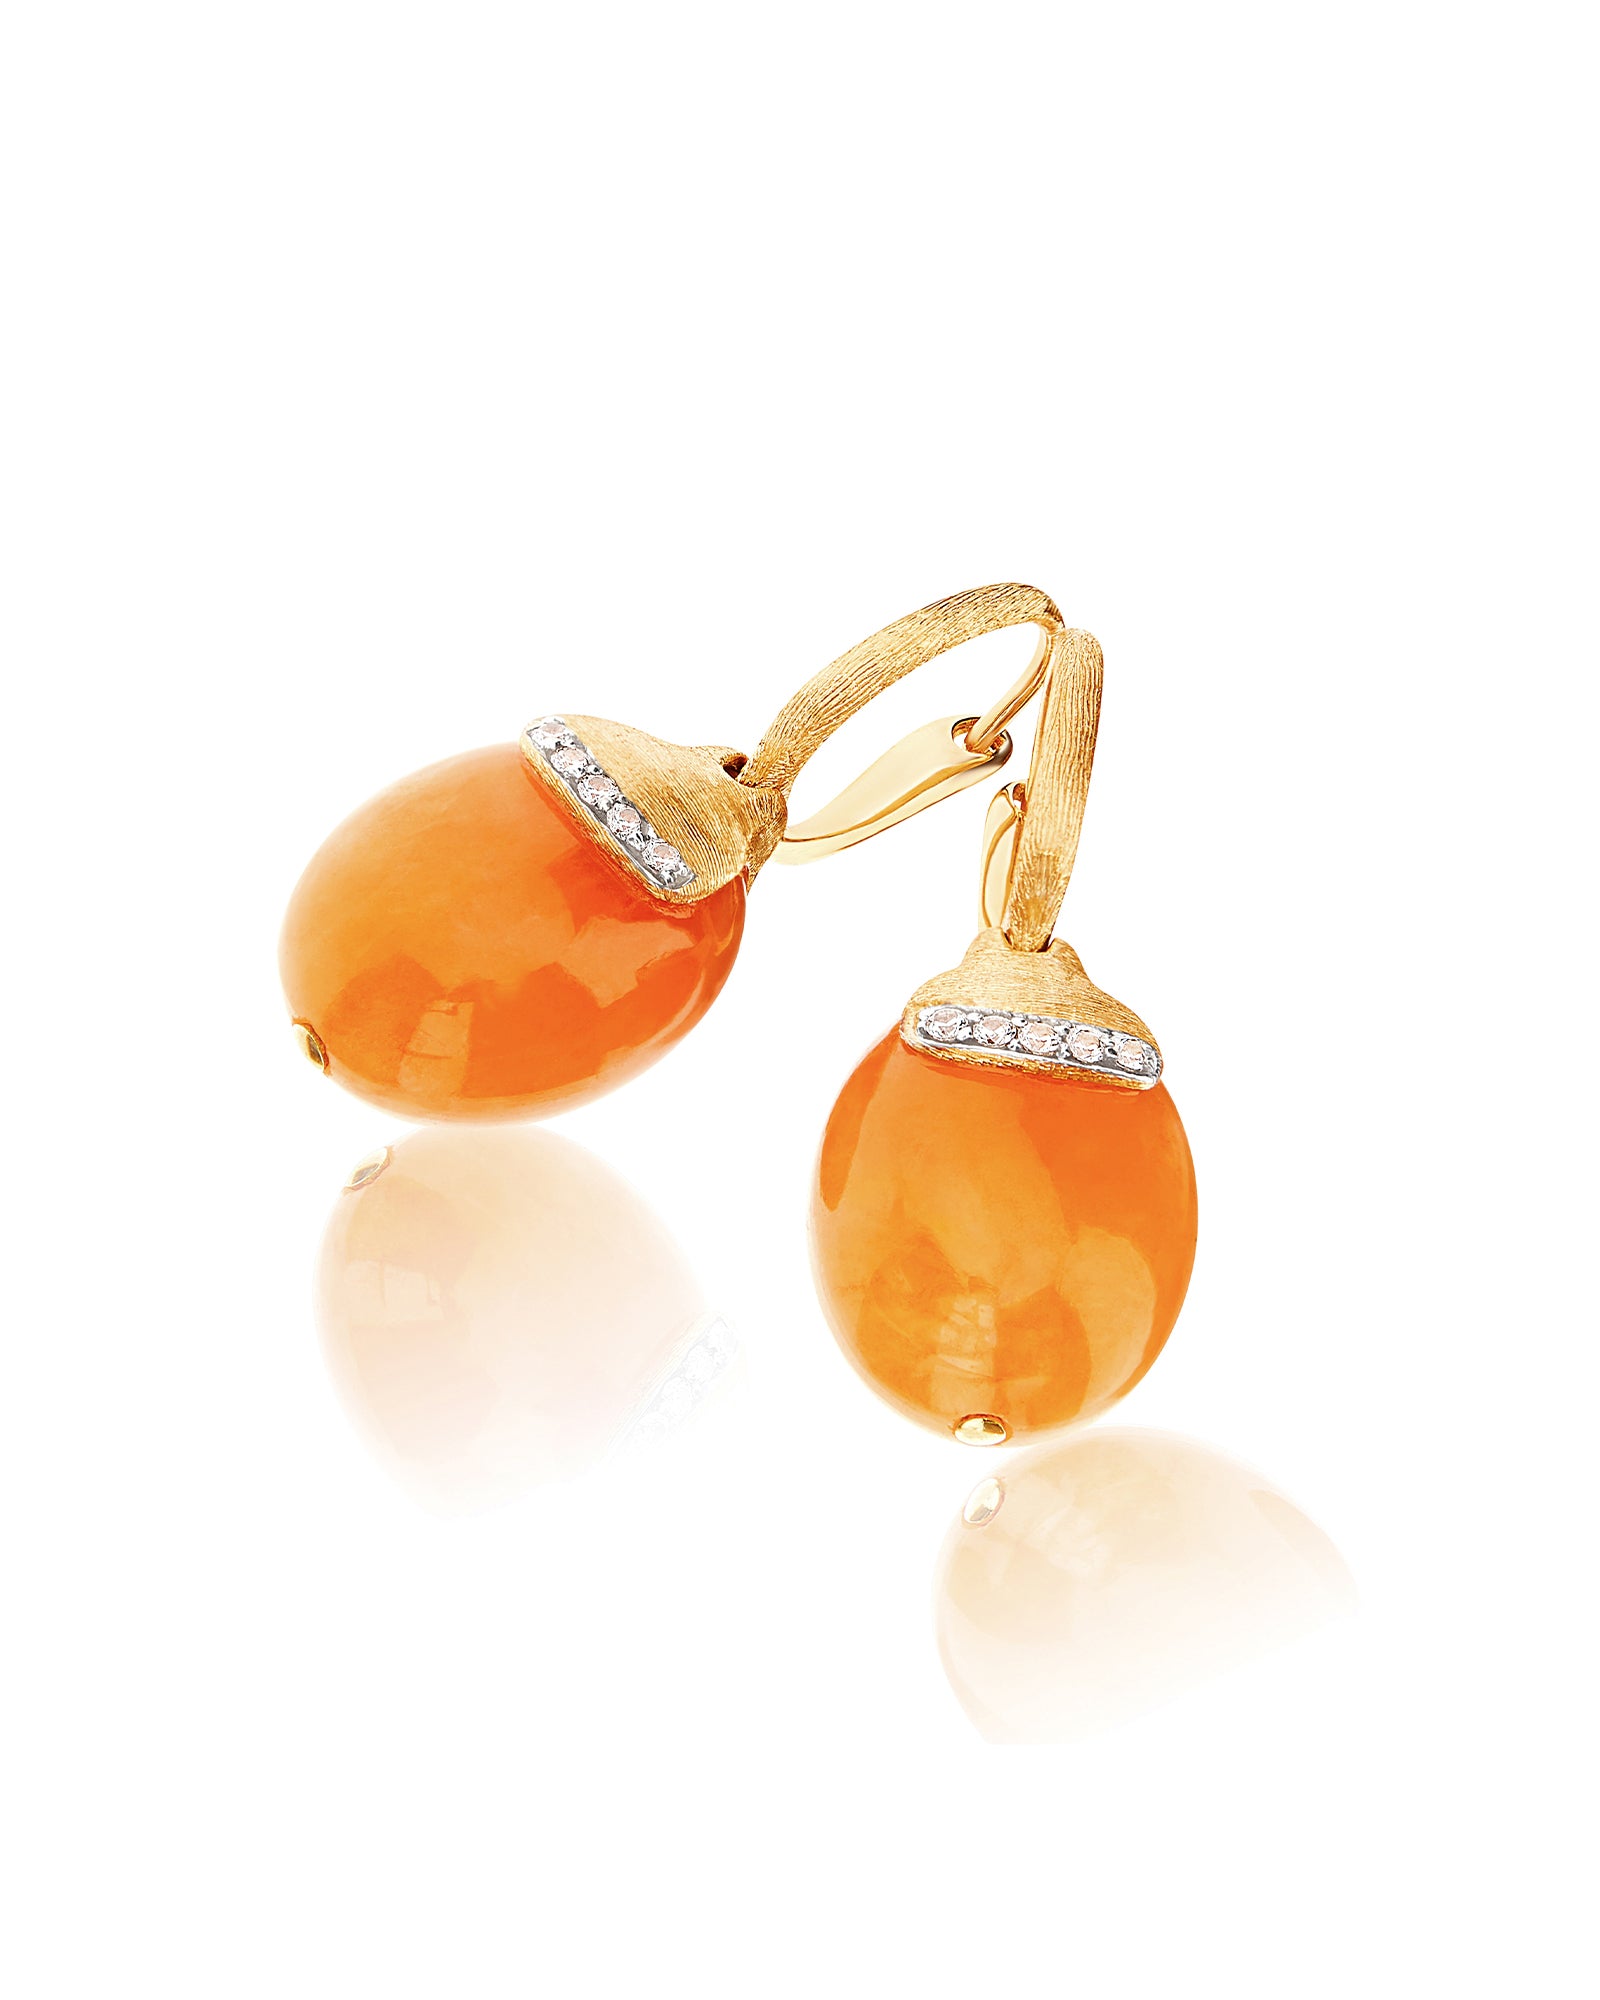 "Petra" Ciliegine Gold and Orange Aventurine Ball Drop Earrings with Diamonds Details (LARGE)